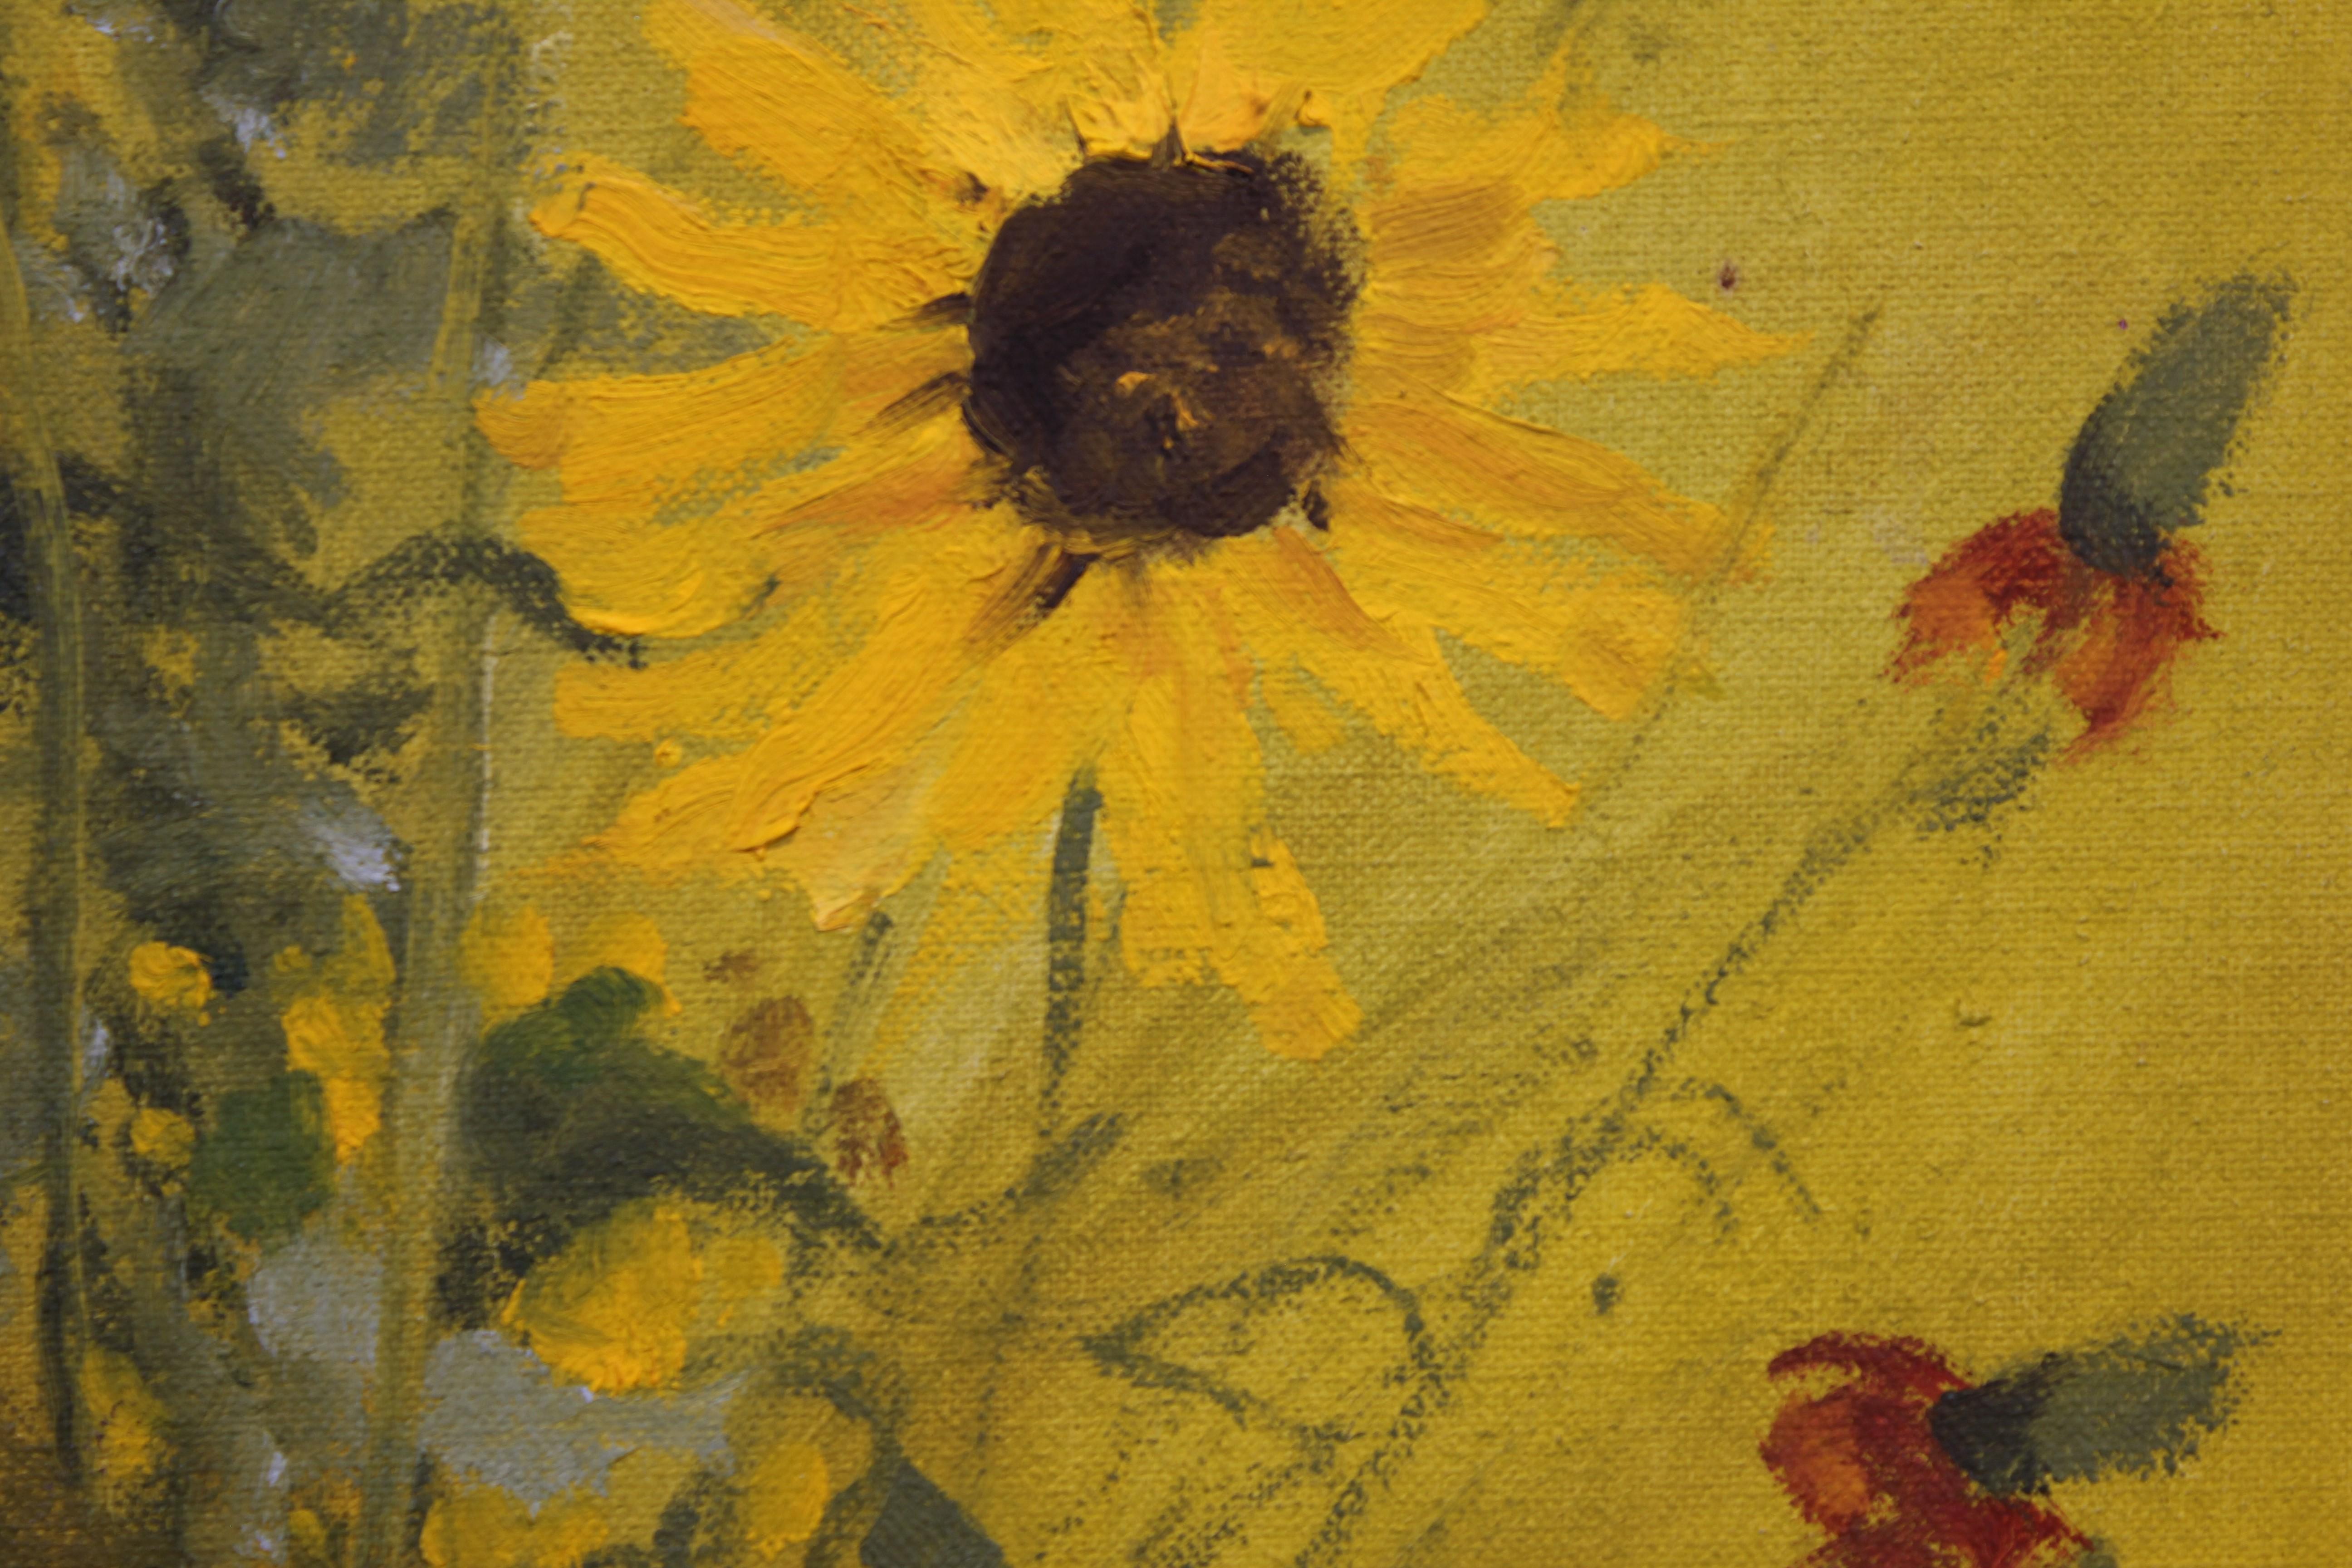 Sunflowers with Texas Wildflowers Floral Still Life - American Impressionist Painting by Henri Gadbois